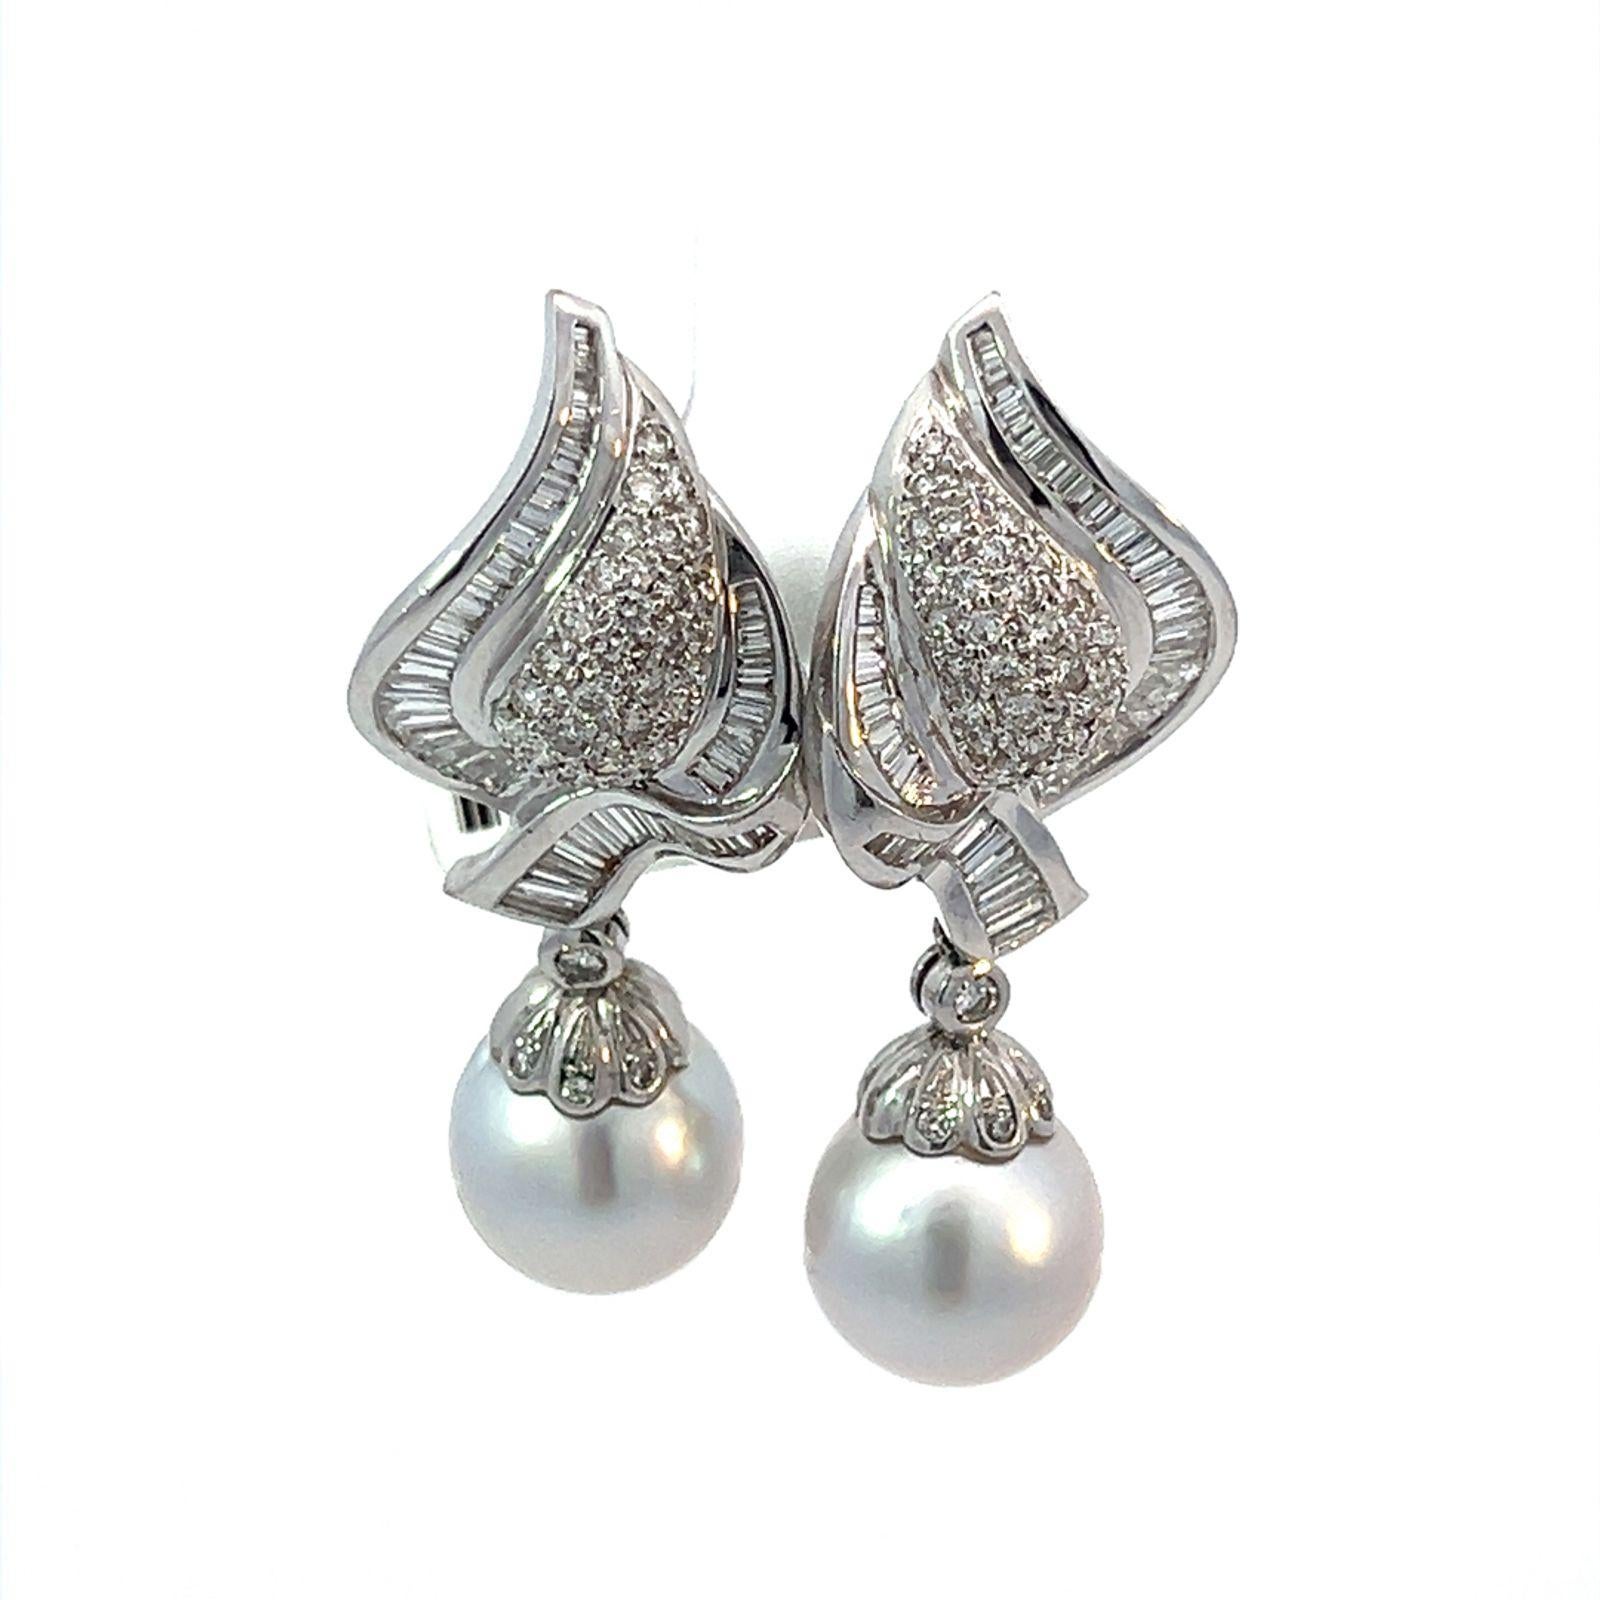 18k White Gold Pearl and Diamond Drop Earrings with 72 round brilliant and 88 baguette diamonds, totaling approximately 2.75 carats. The earrings can be worn with or without the bottom pearls attached. 
The removable, white lustrous, 12mm dangle